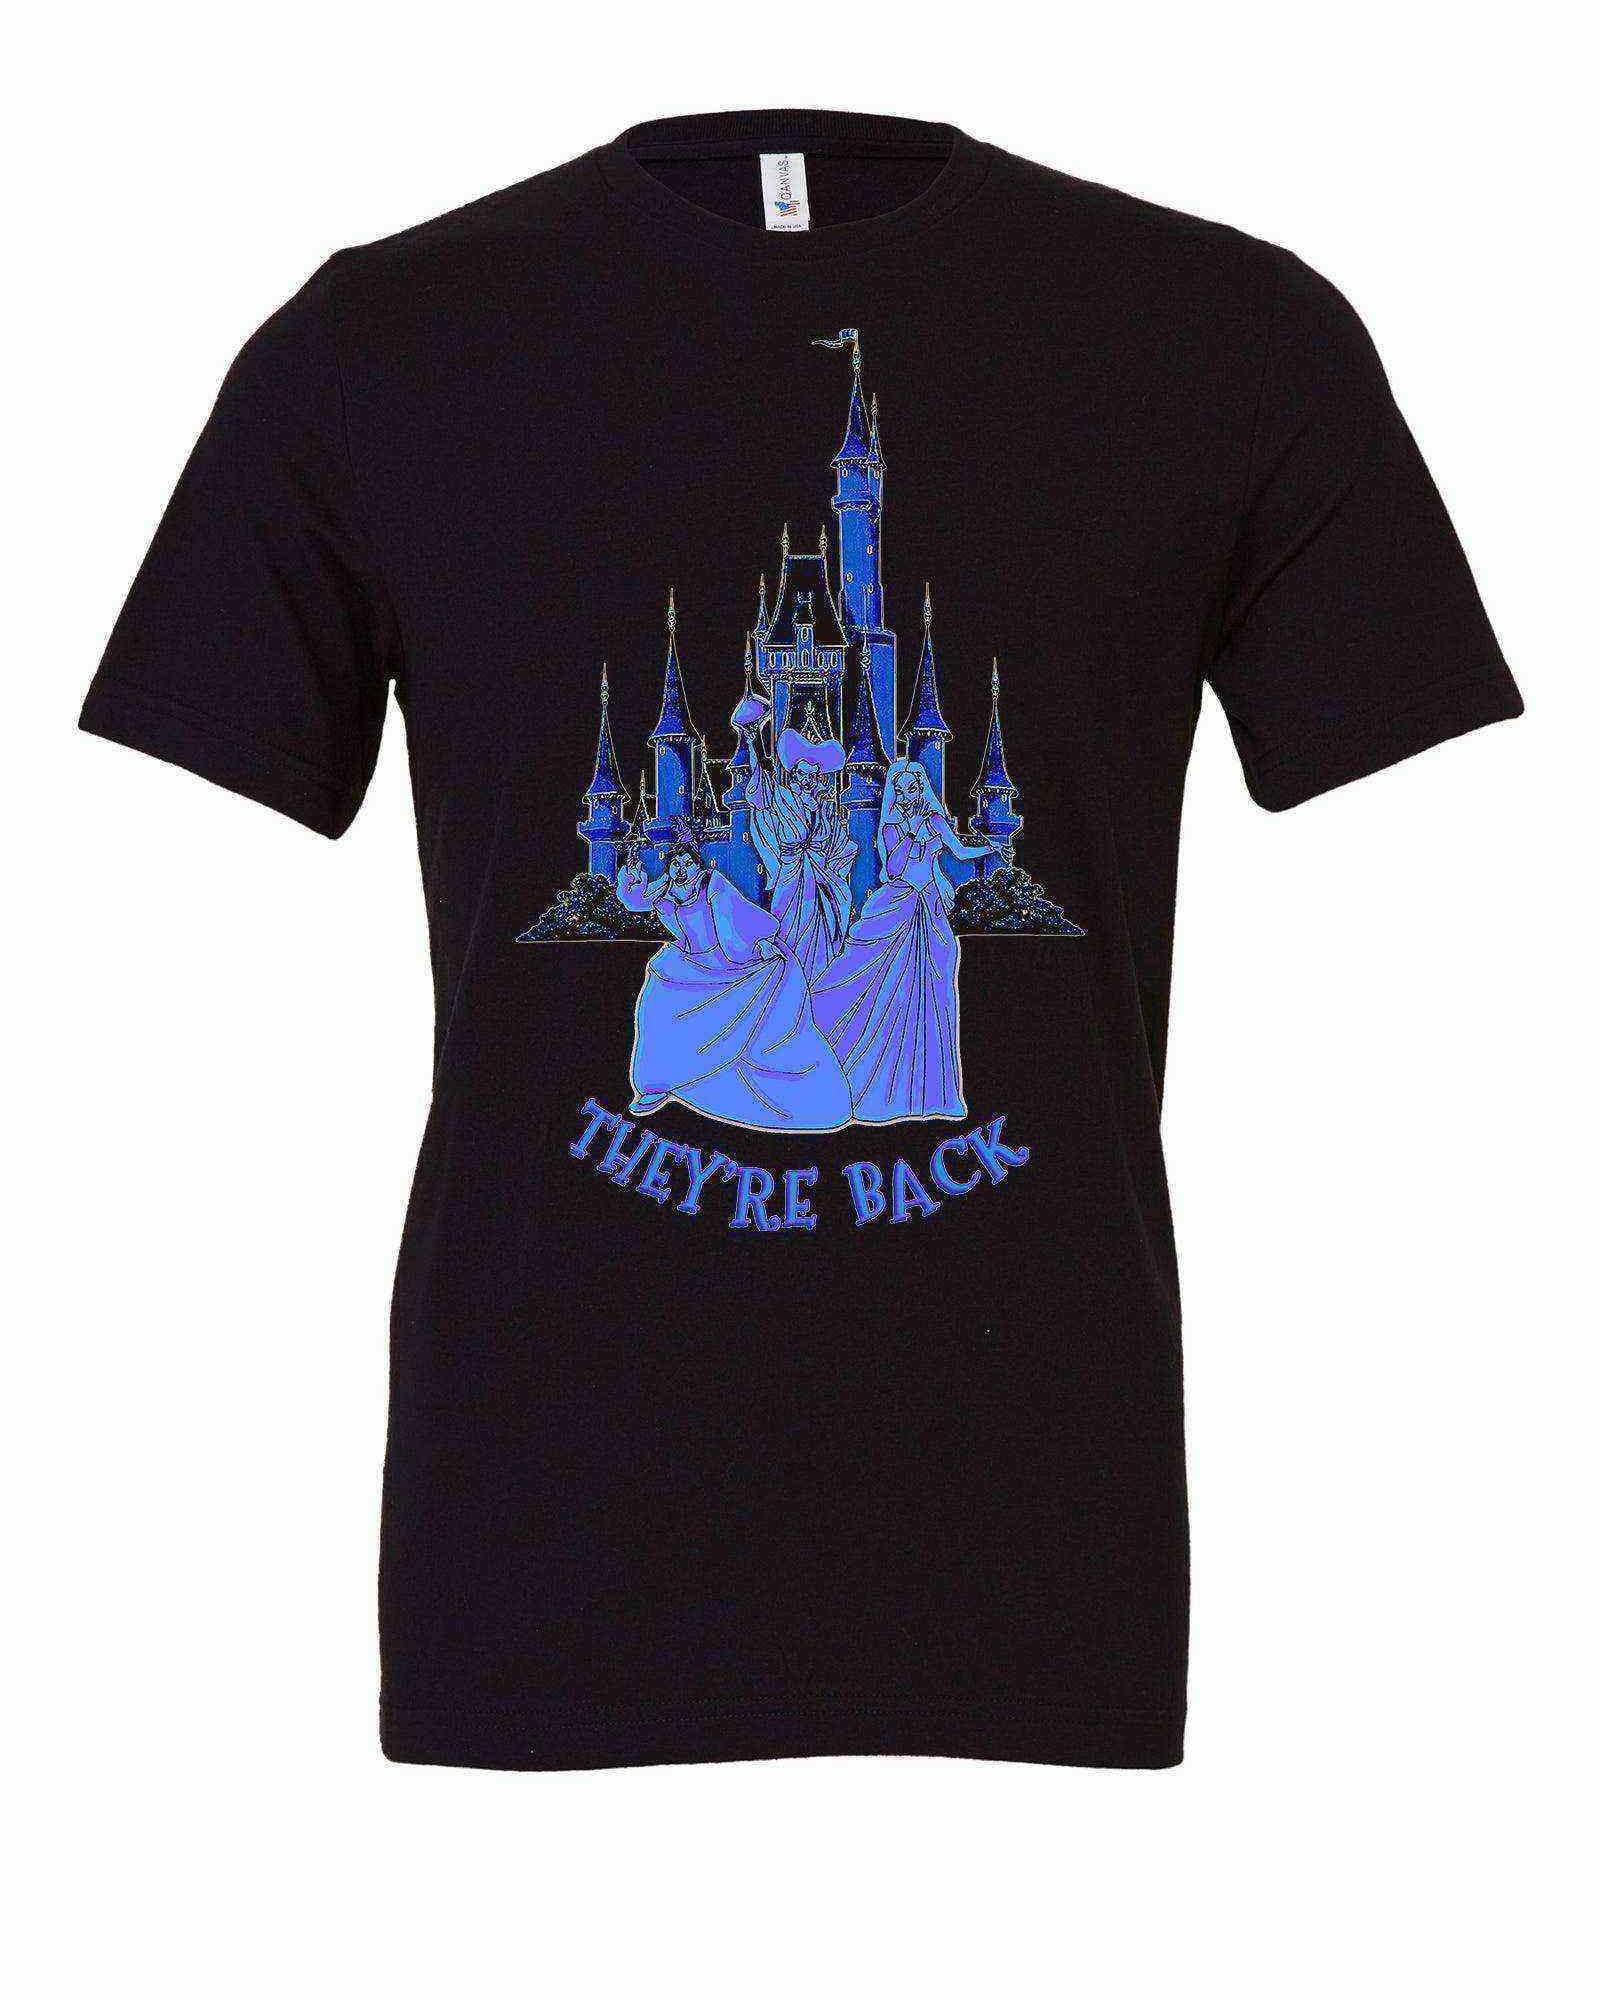 Womens | Sanderson Sisters Shirt | Witches Are Back | Magic Kingdom Hocus Pocus - Dylan's Tees